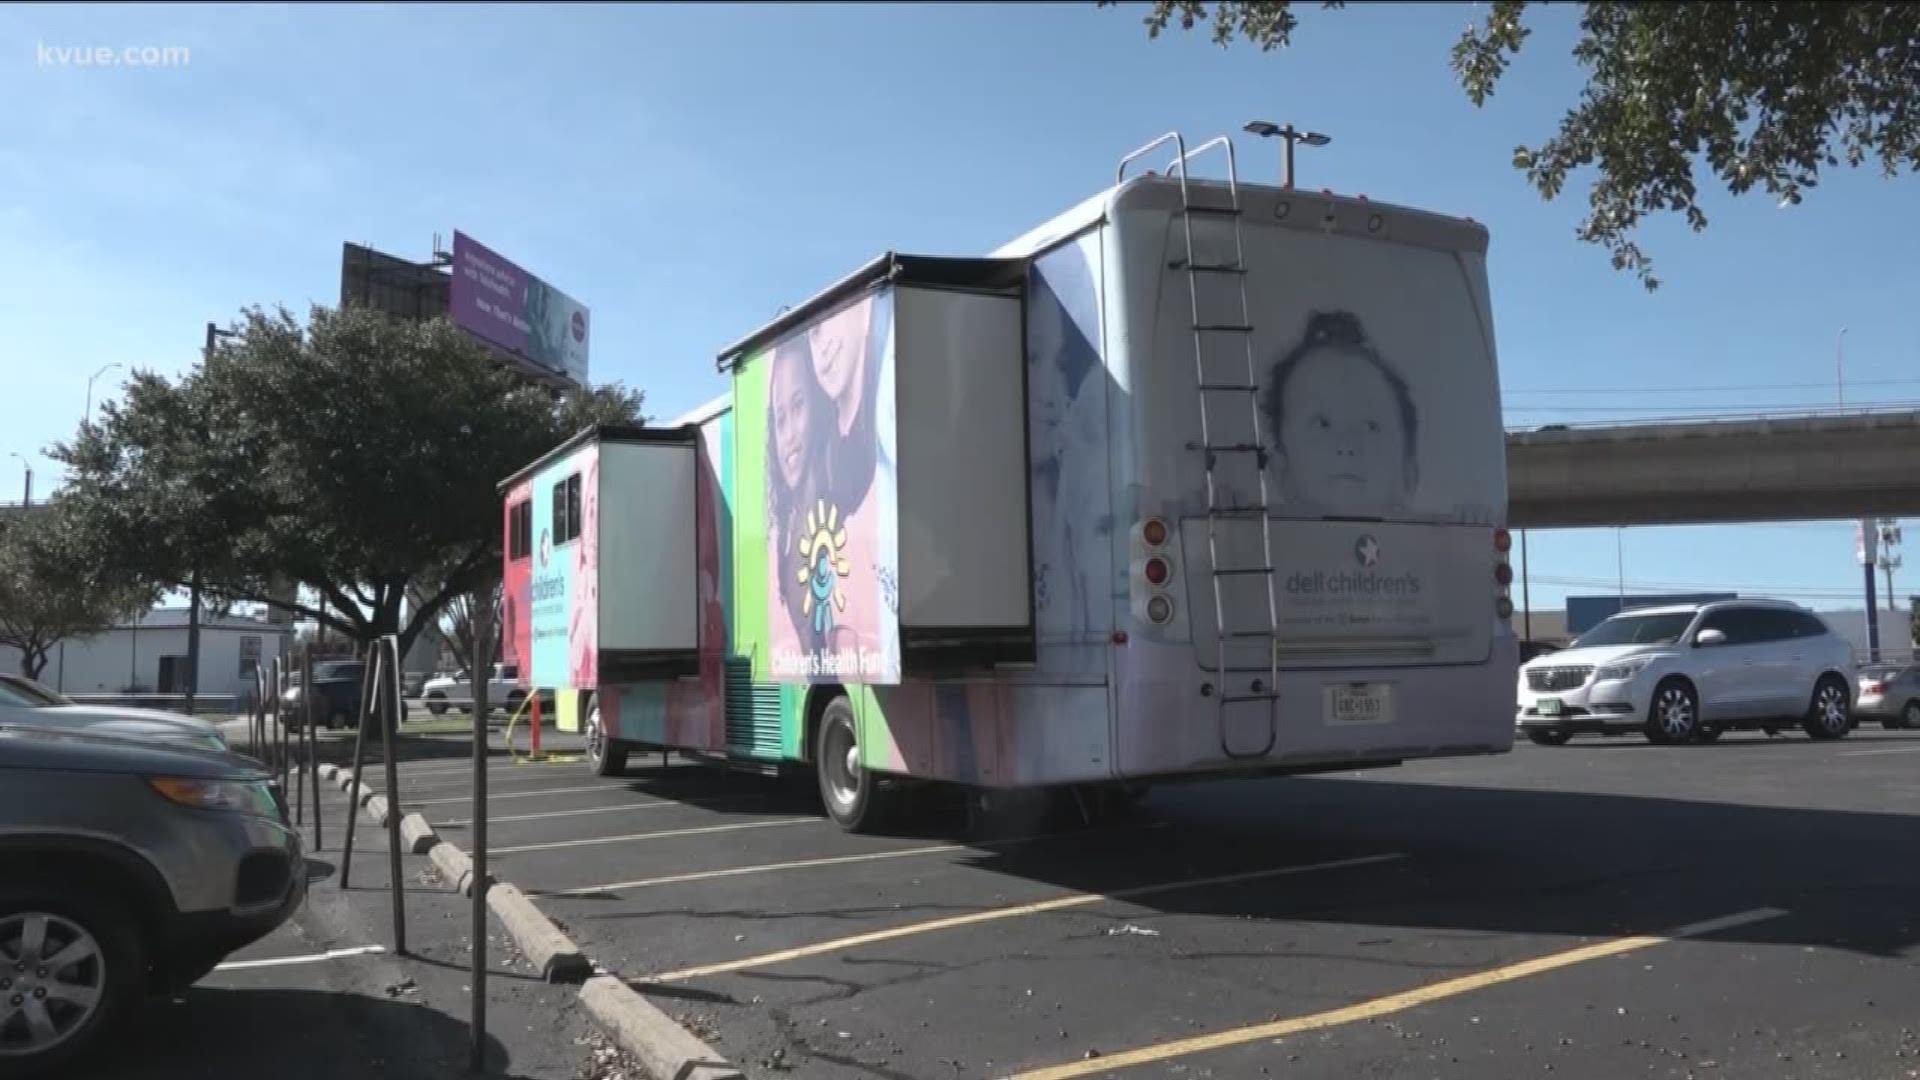 The doctor's office on wheels is bringing health care directly to kids in need.